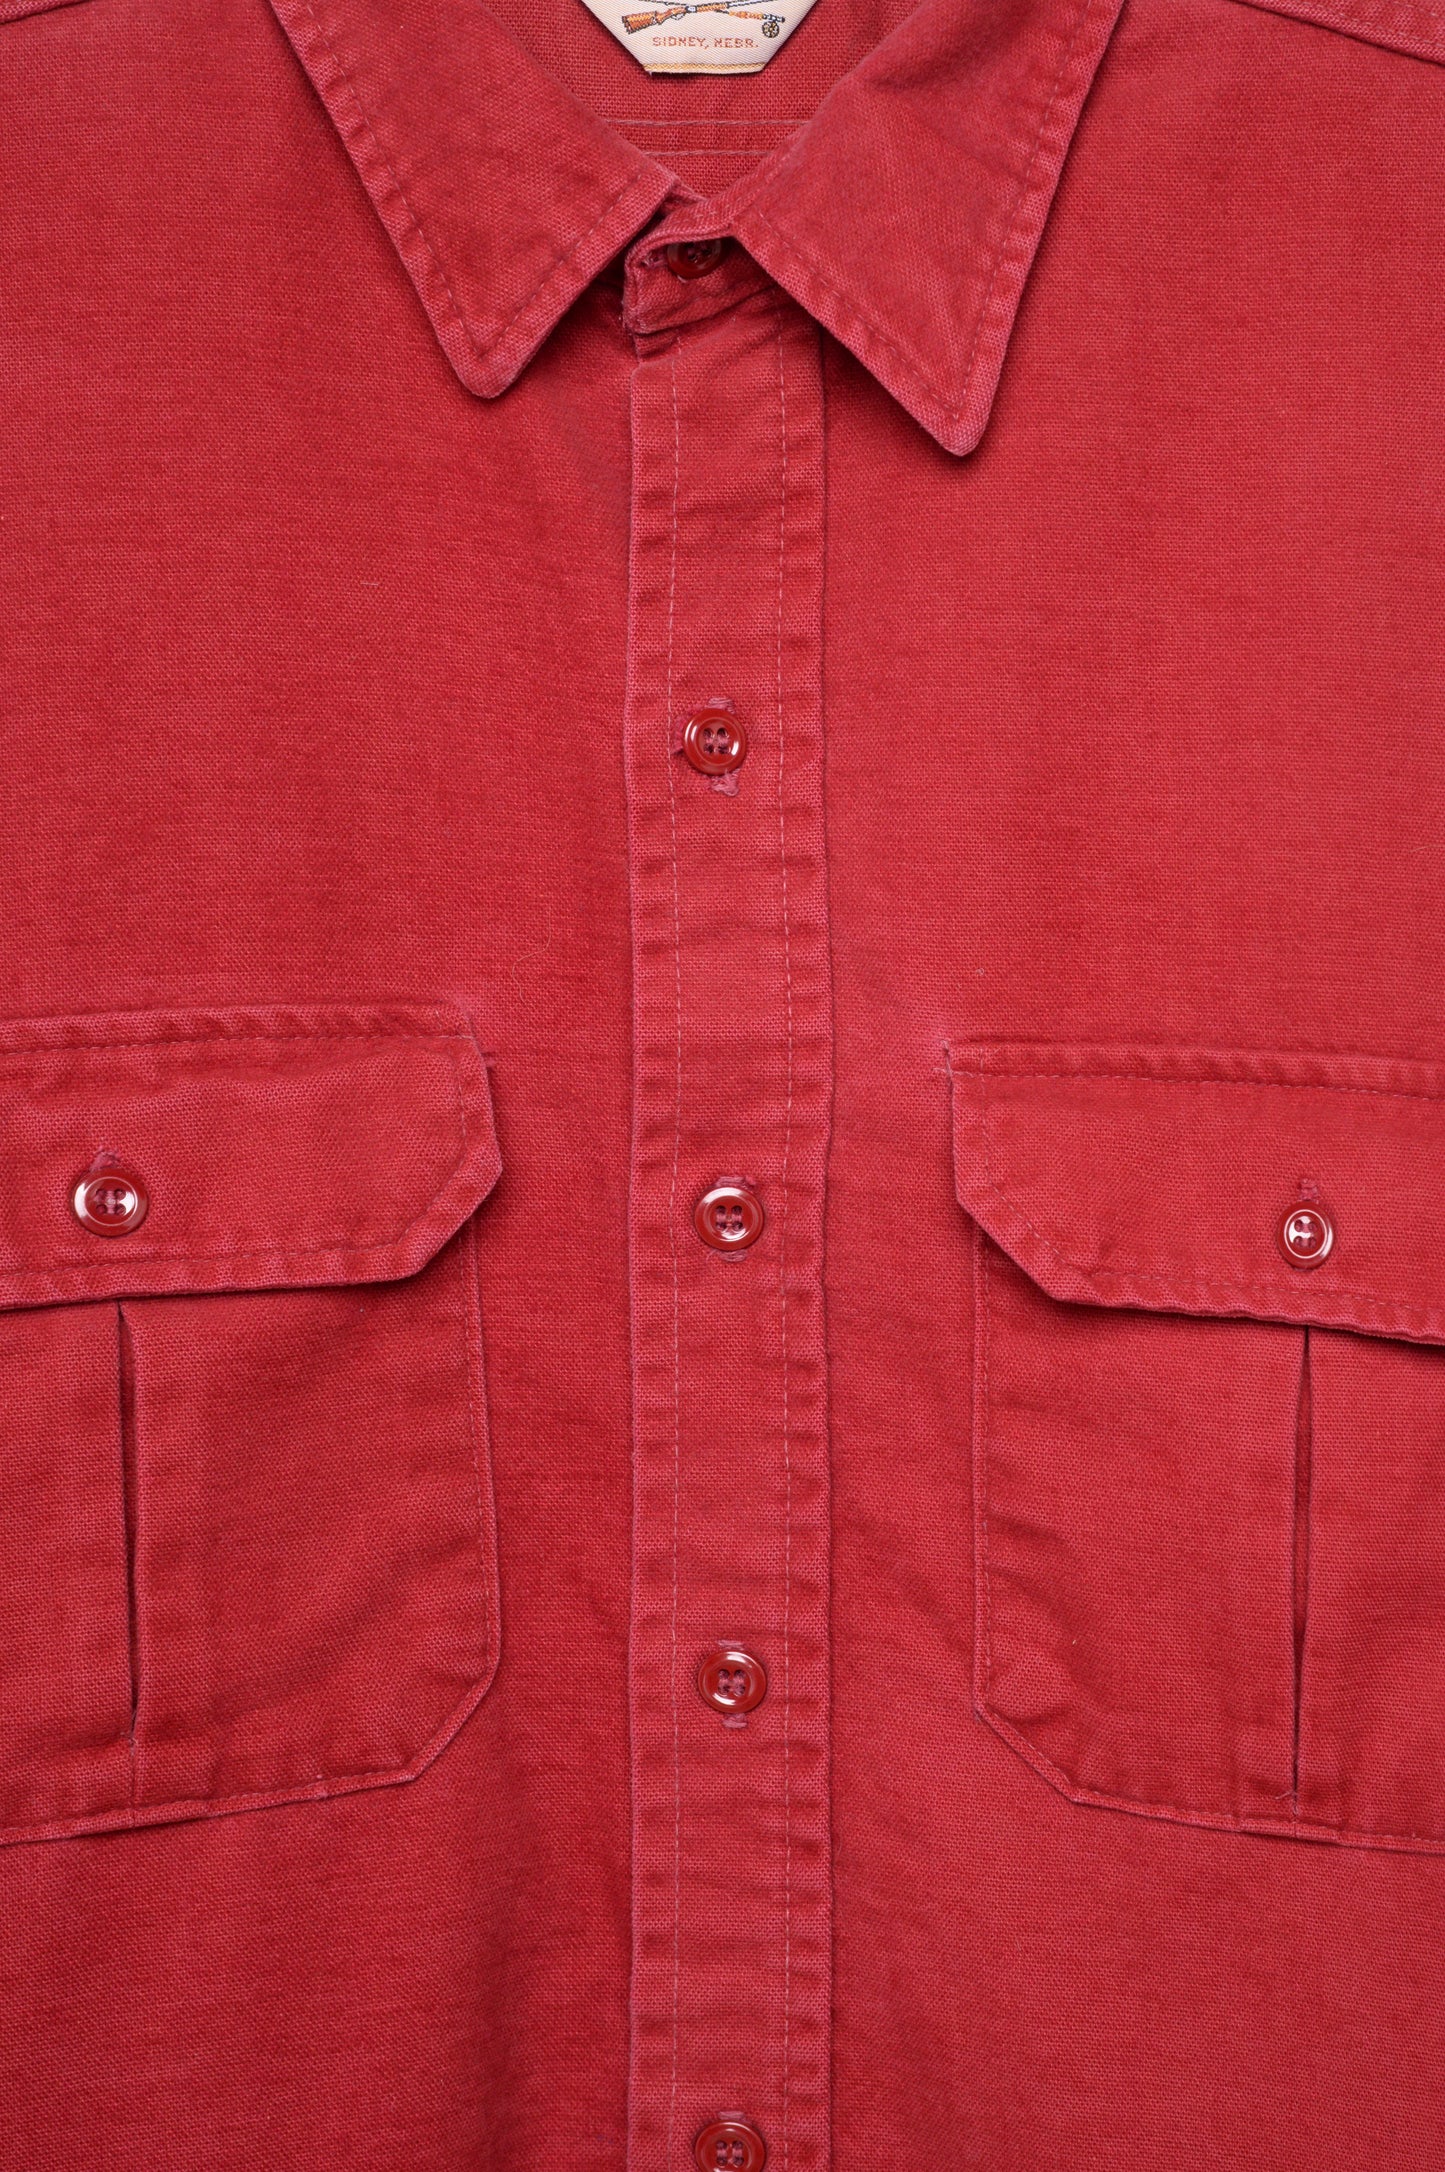 Red Button Down